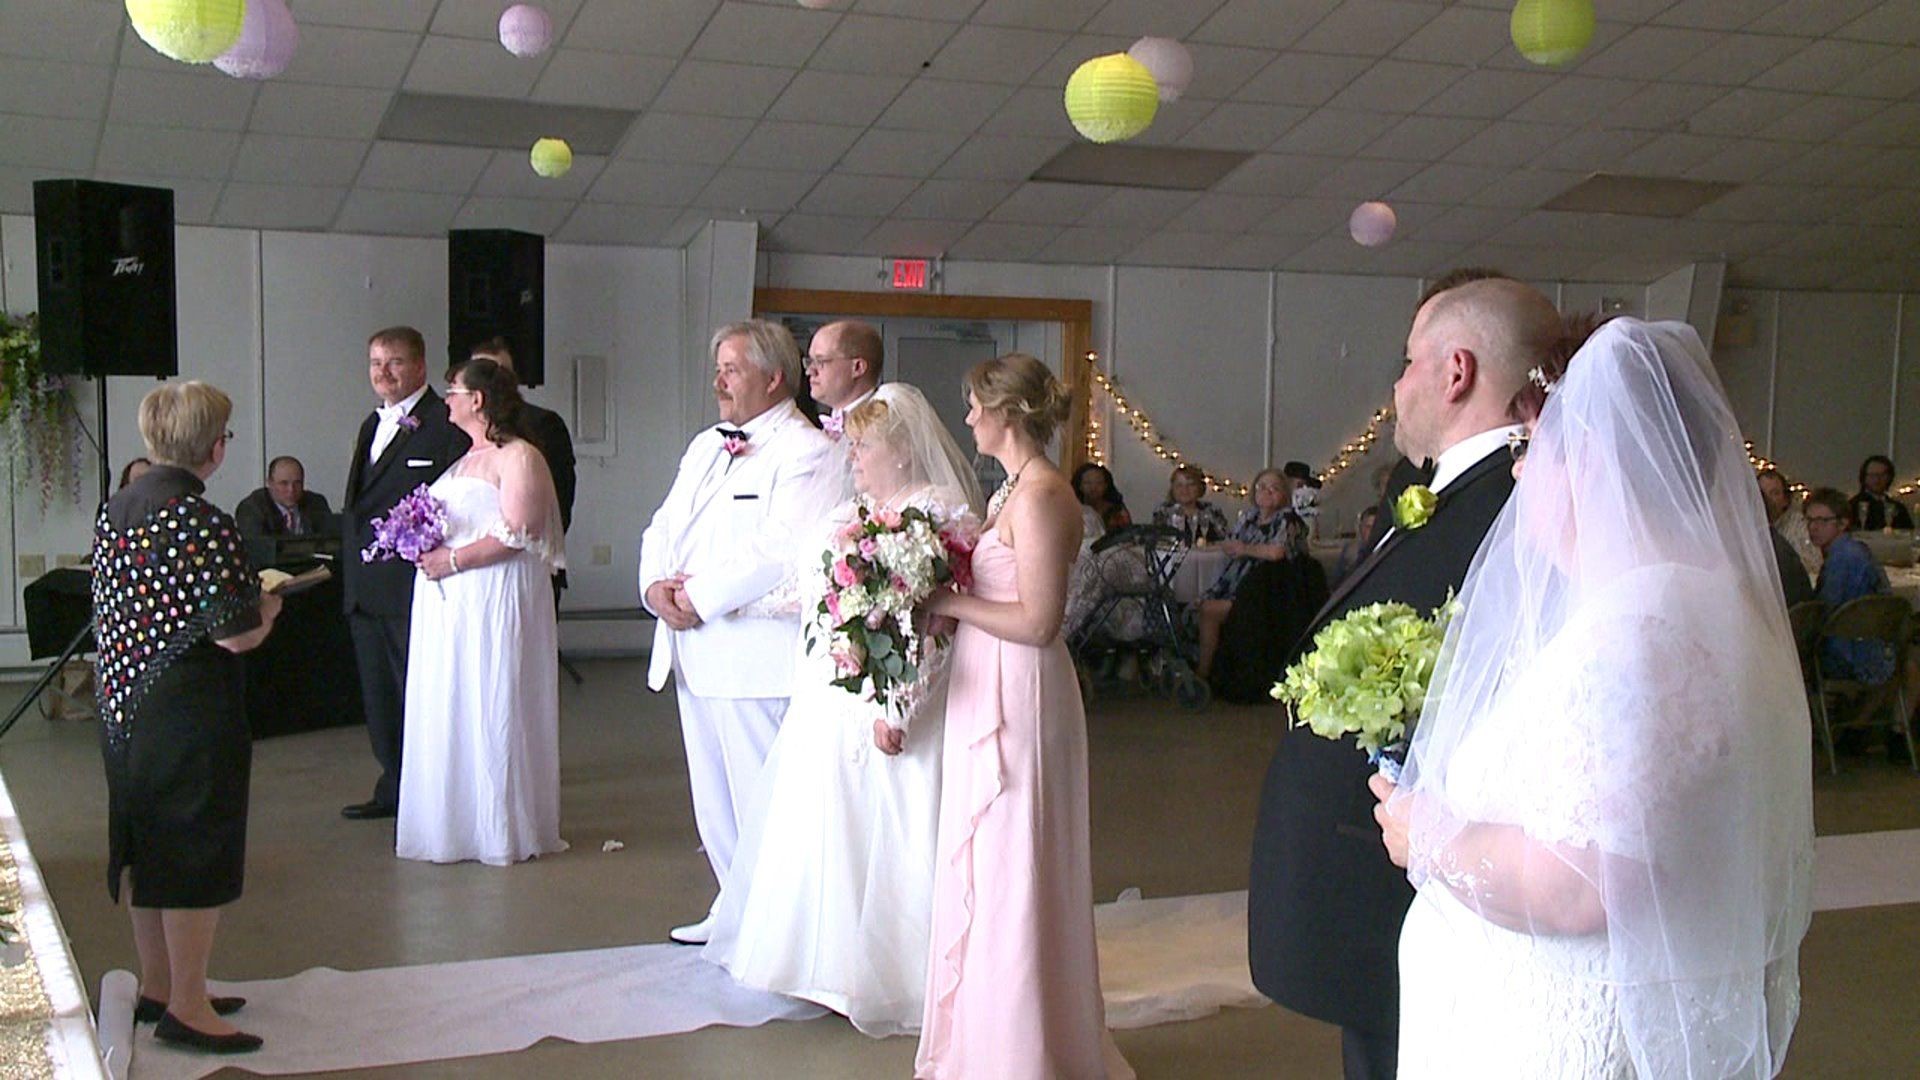 Three Brothers Marry Their Brides in Triple Wedding Ceremony